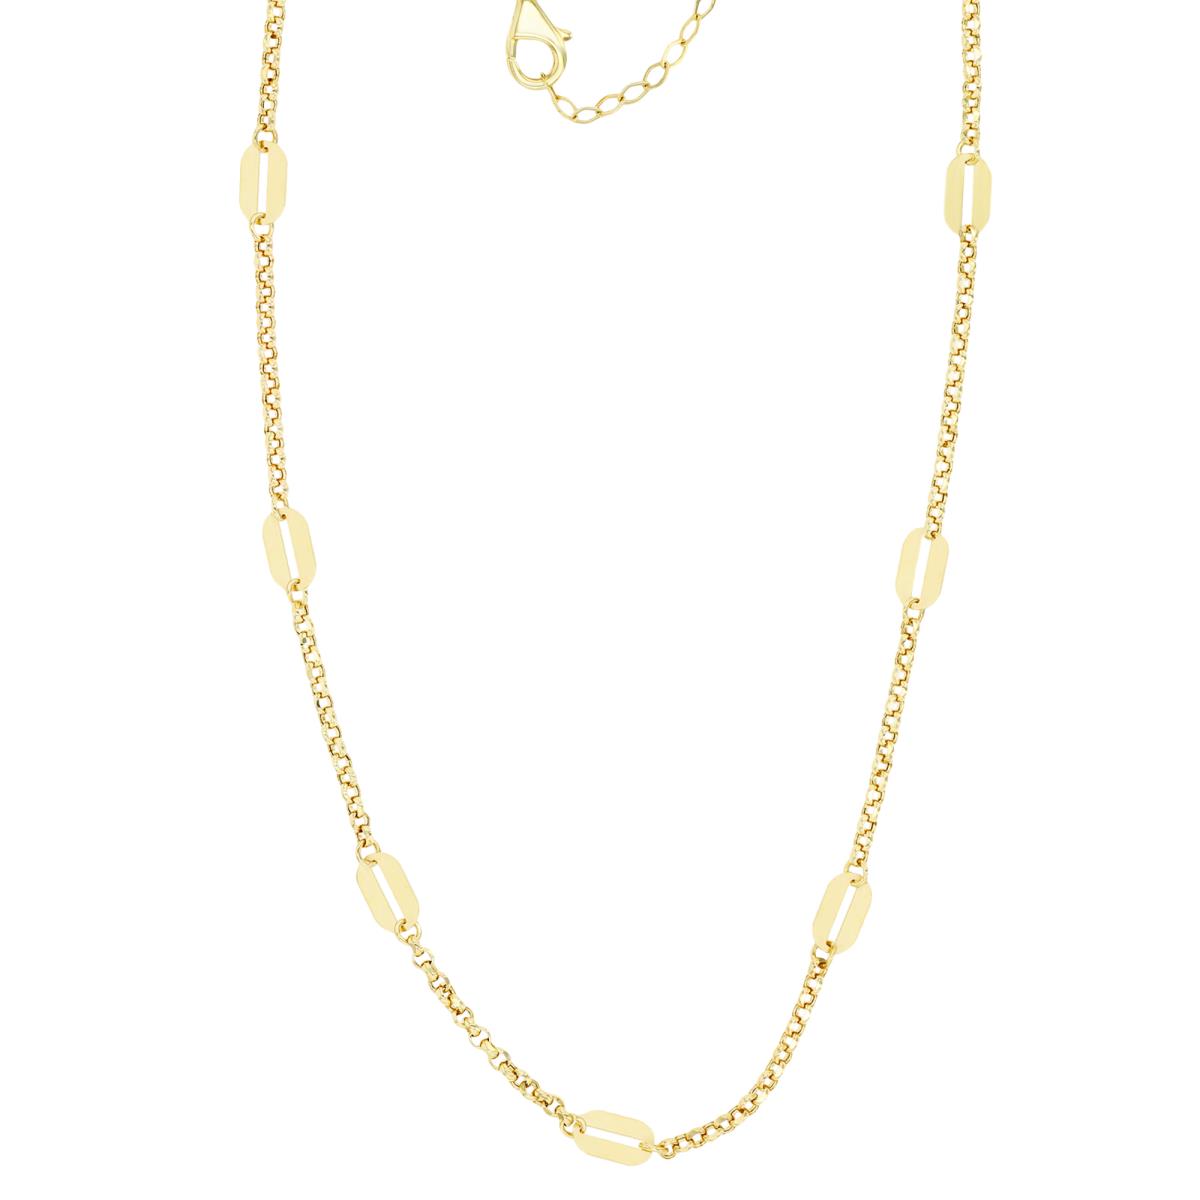 14K Yellow Gold Chain and Paperclip 24"+1" Chain Necklace